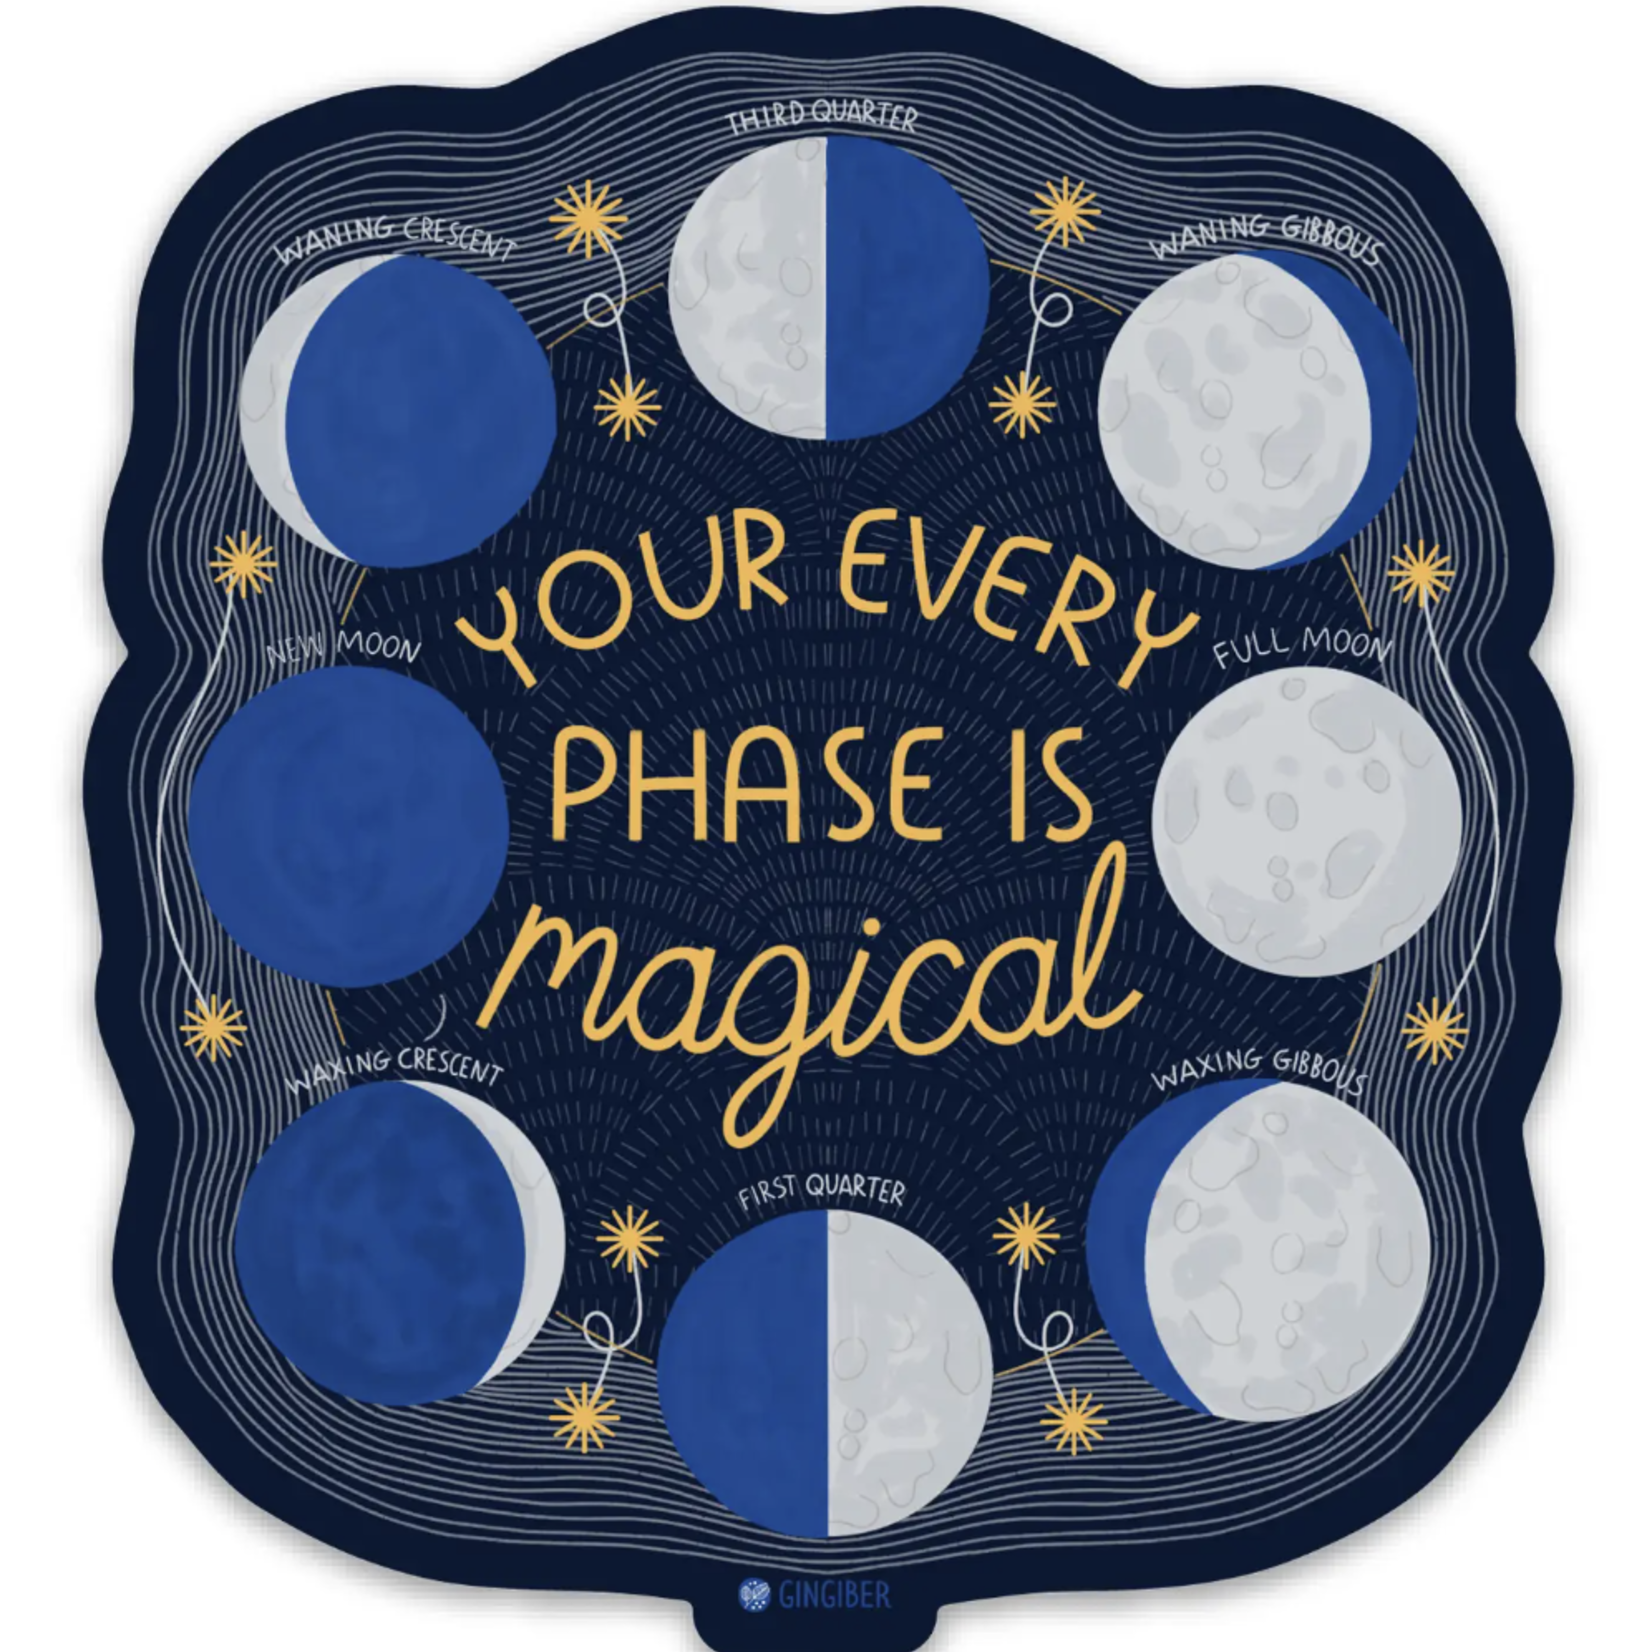 Every Moon Phase Sticker